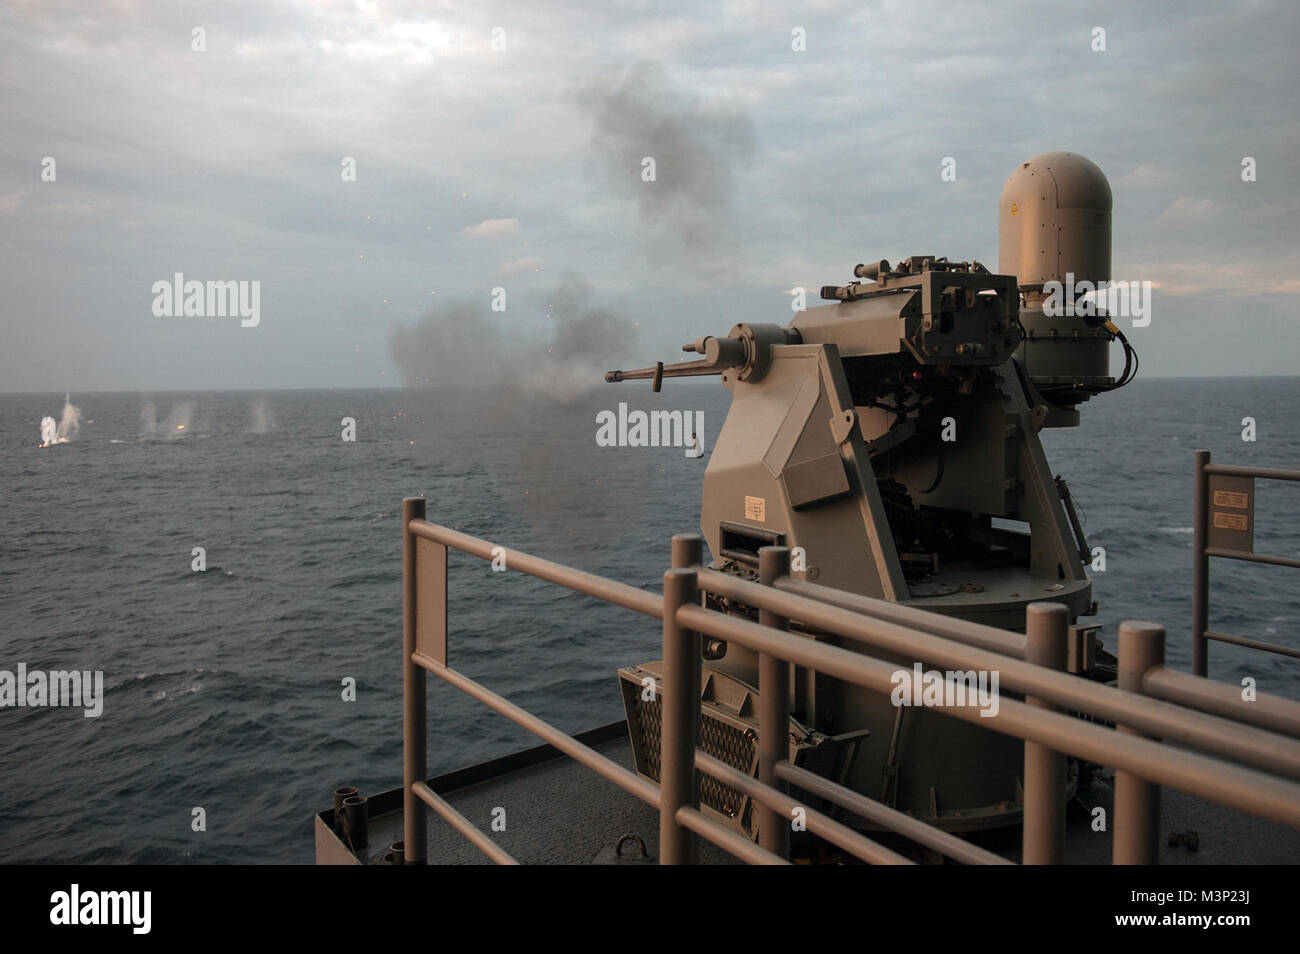 171220-N-ZS023-059 INDIAN OCEAN (Dec. 20, 2017) A Mark 38 Mod. II machine gun system aboard the amphibious assault ship USS America (LHA 6) fires 25mm rounds during a live fire exercise on the starboard weather deck. America, part of the America Amphibious Ready Group, with embarked 15th Marine Expeditionary Unit, is operating in the Indo-Asia Pacific region to strengthen partnerships and serve as a ready-response force for any type of contingency. (U.S. Navy photo by Mass Communication Specialist 3rd Class Vance Hand/Released) Service members train with a Mark 38 Mod. II machine gun system ab Stock Photo